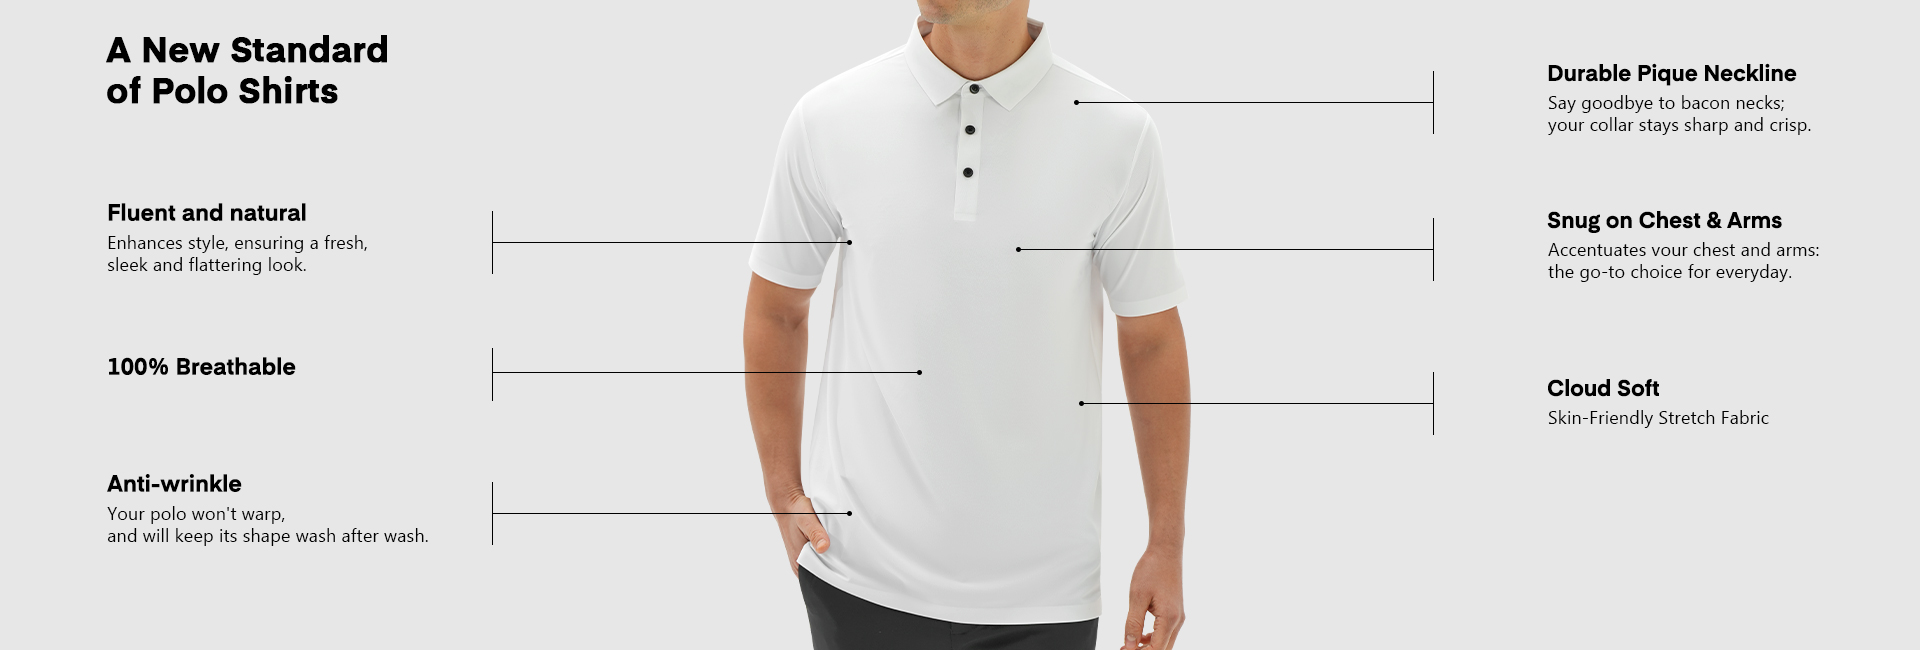 Stay Cool Performance Seamless Stretch Polo - Deolax Golf Shirts